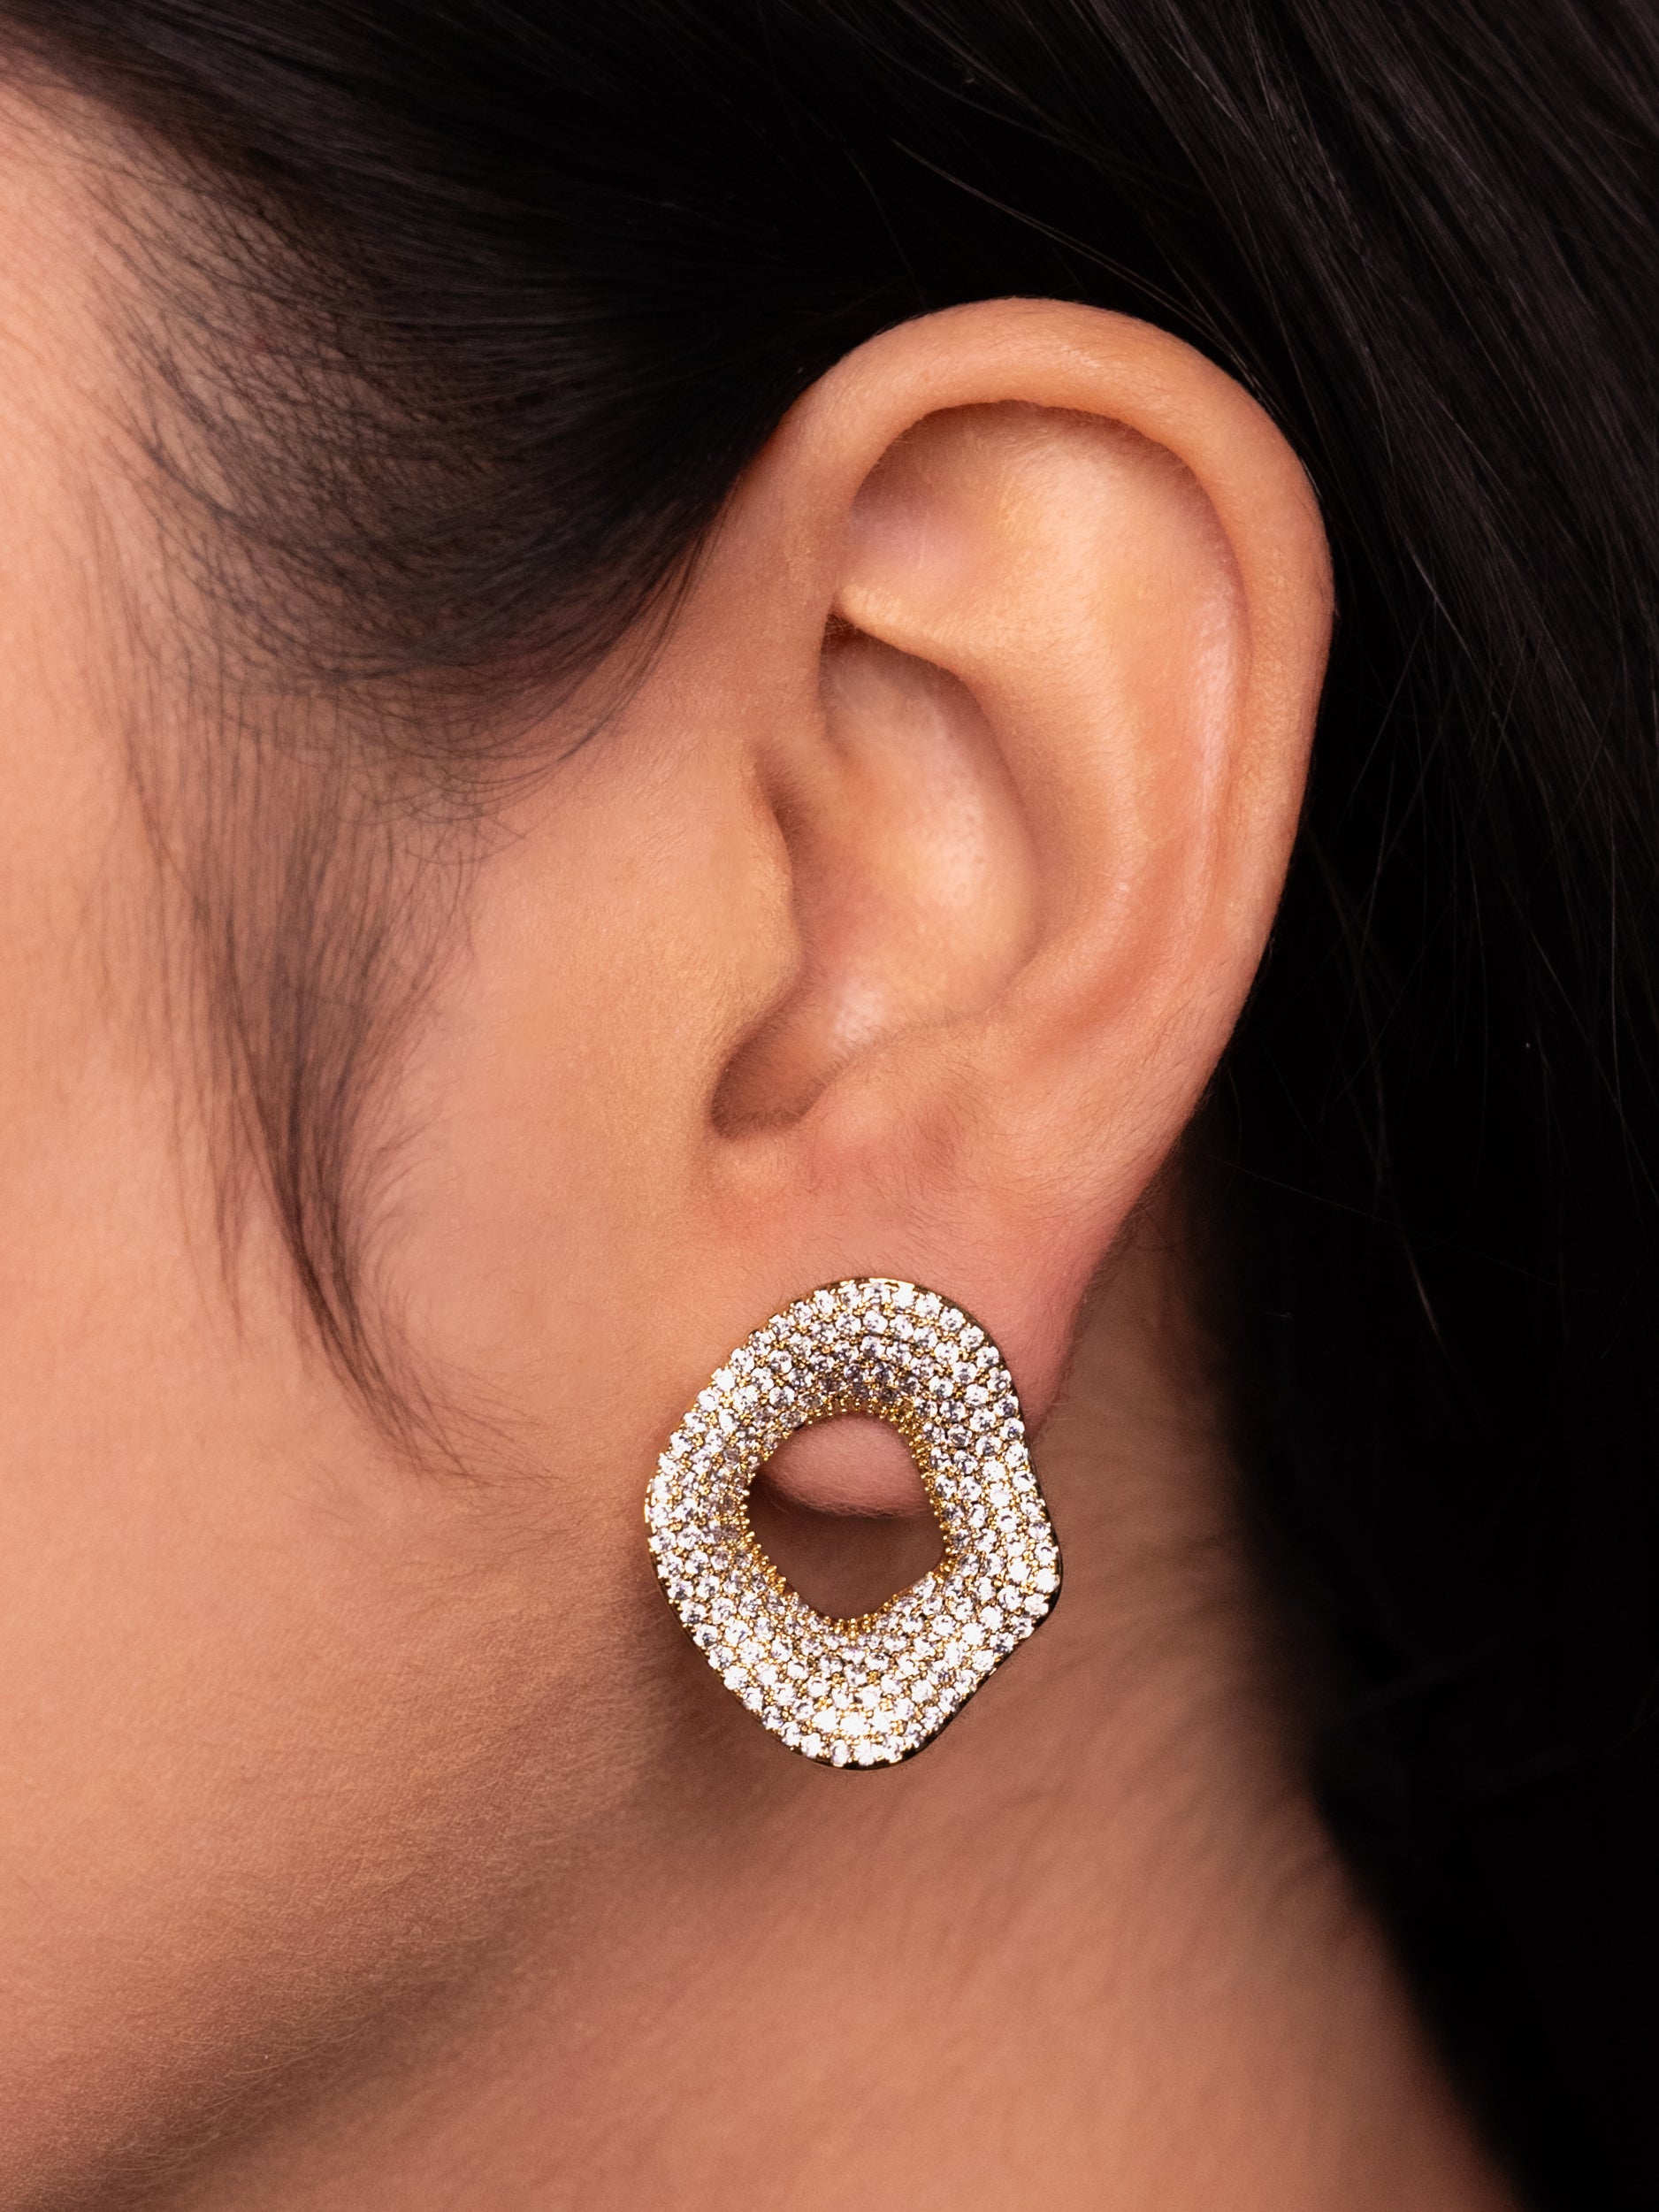 CZ White Stone Studded Earrings | 18k Gold Plated